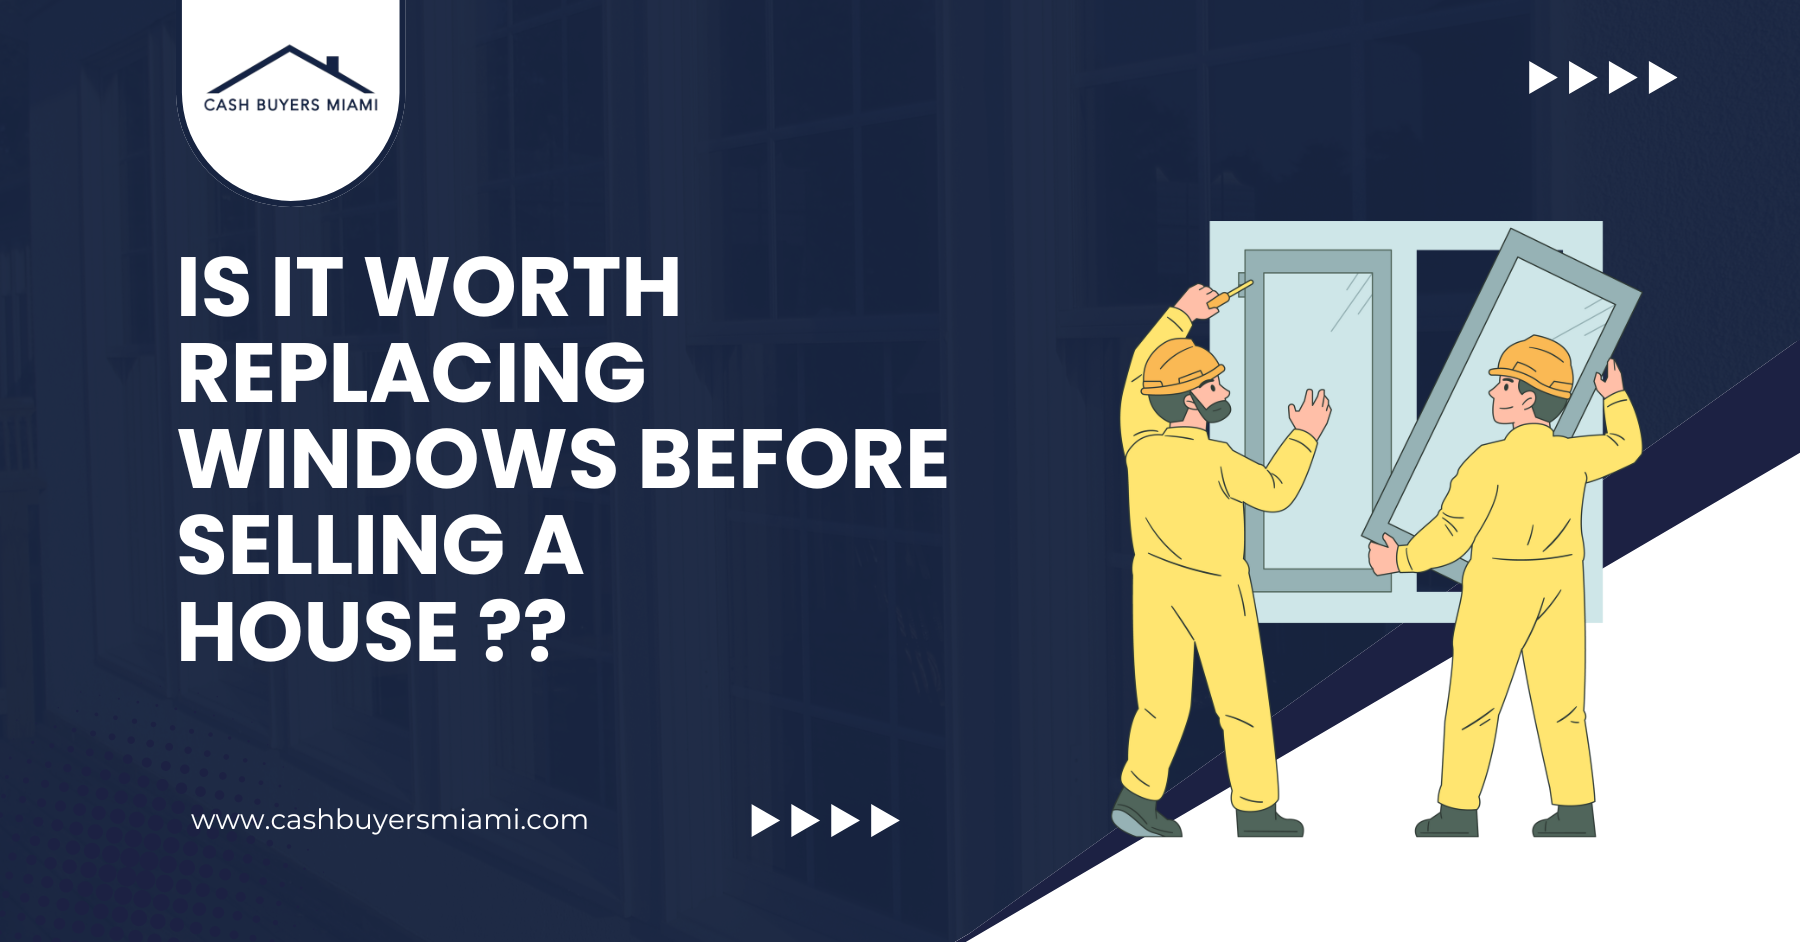 Is It Worth Replacing Windows Before Selling a House